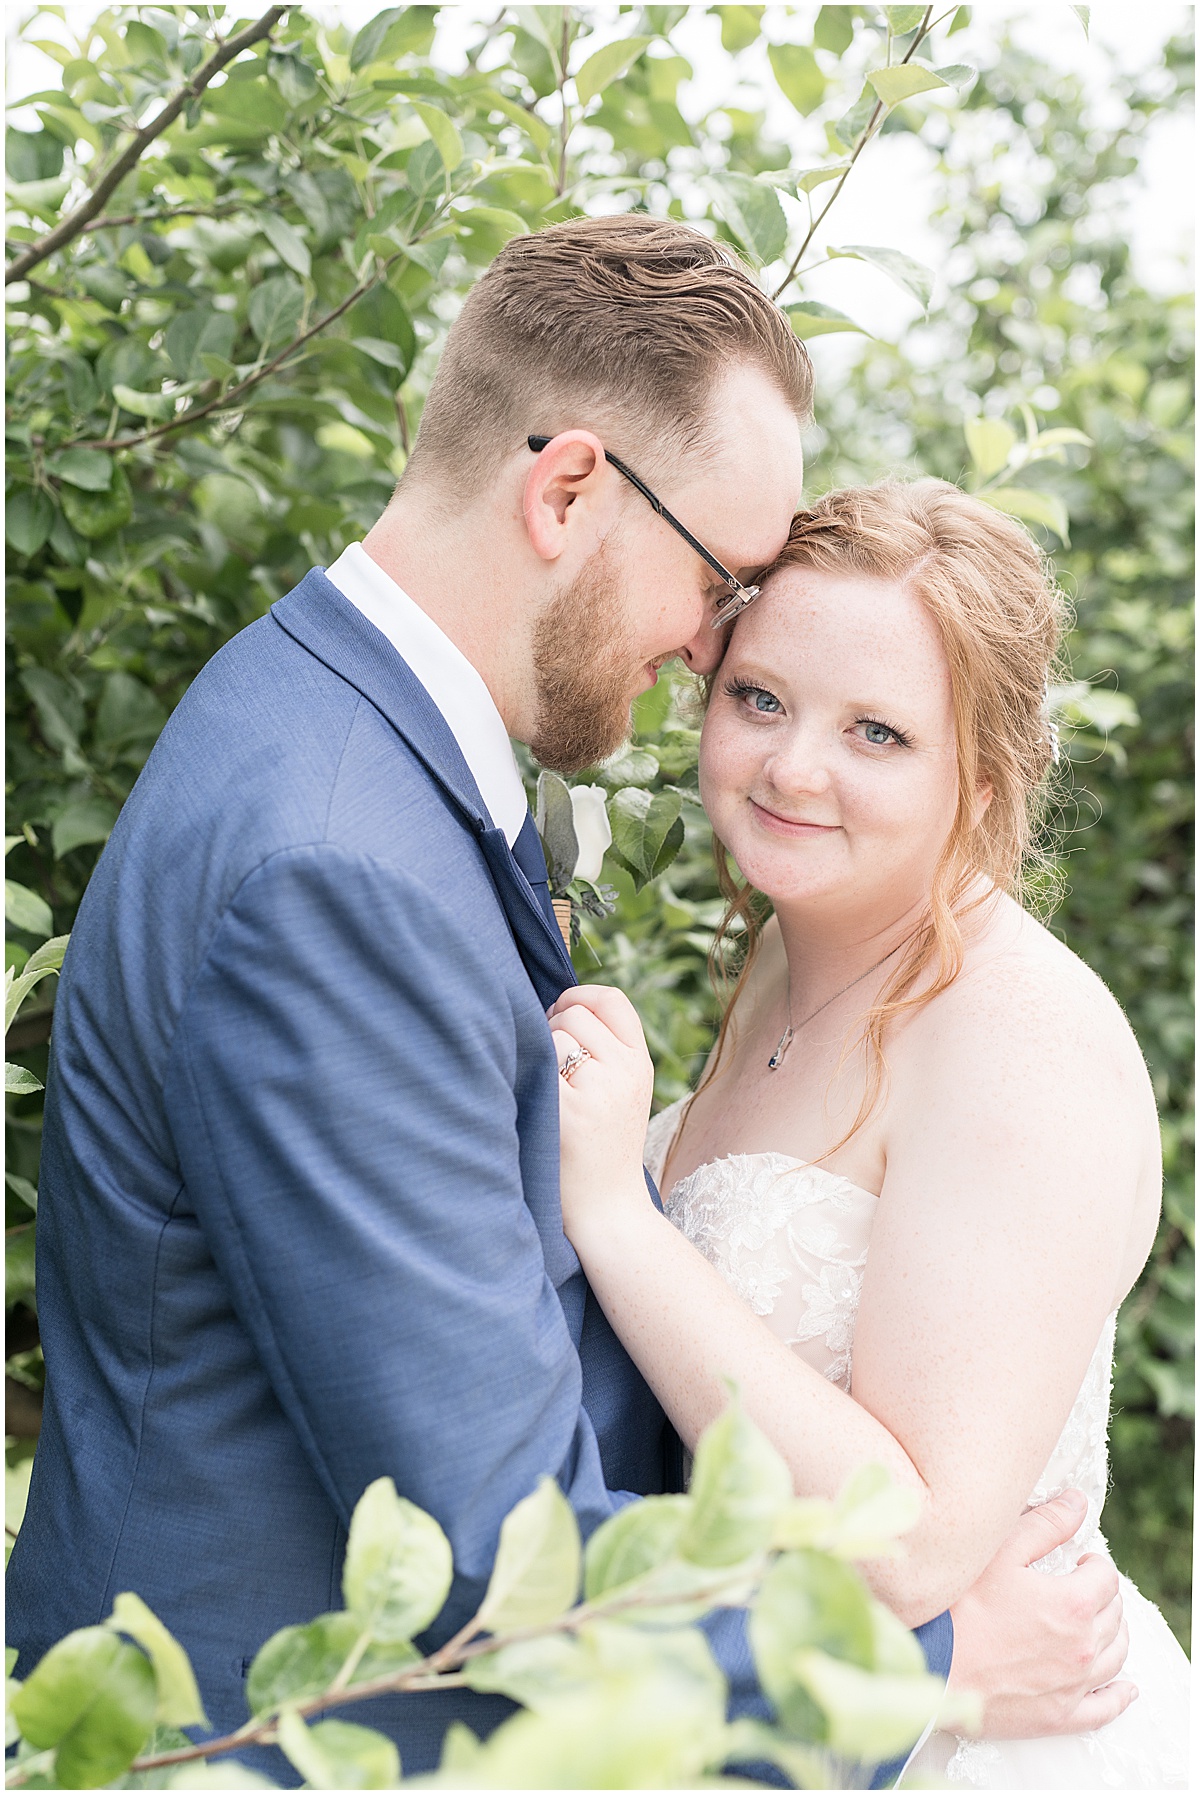 Bride and groom photos at County Line Orchard wedding in Hobart, Indiana